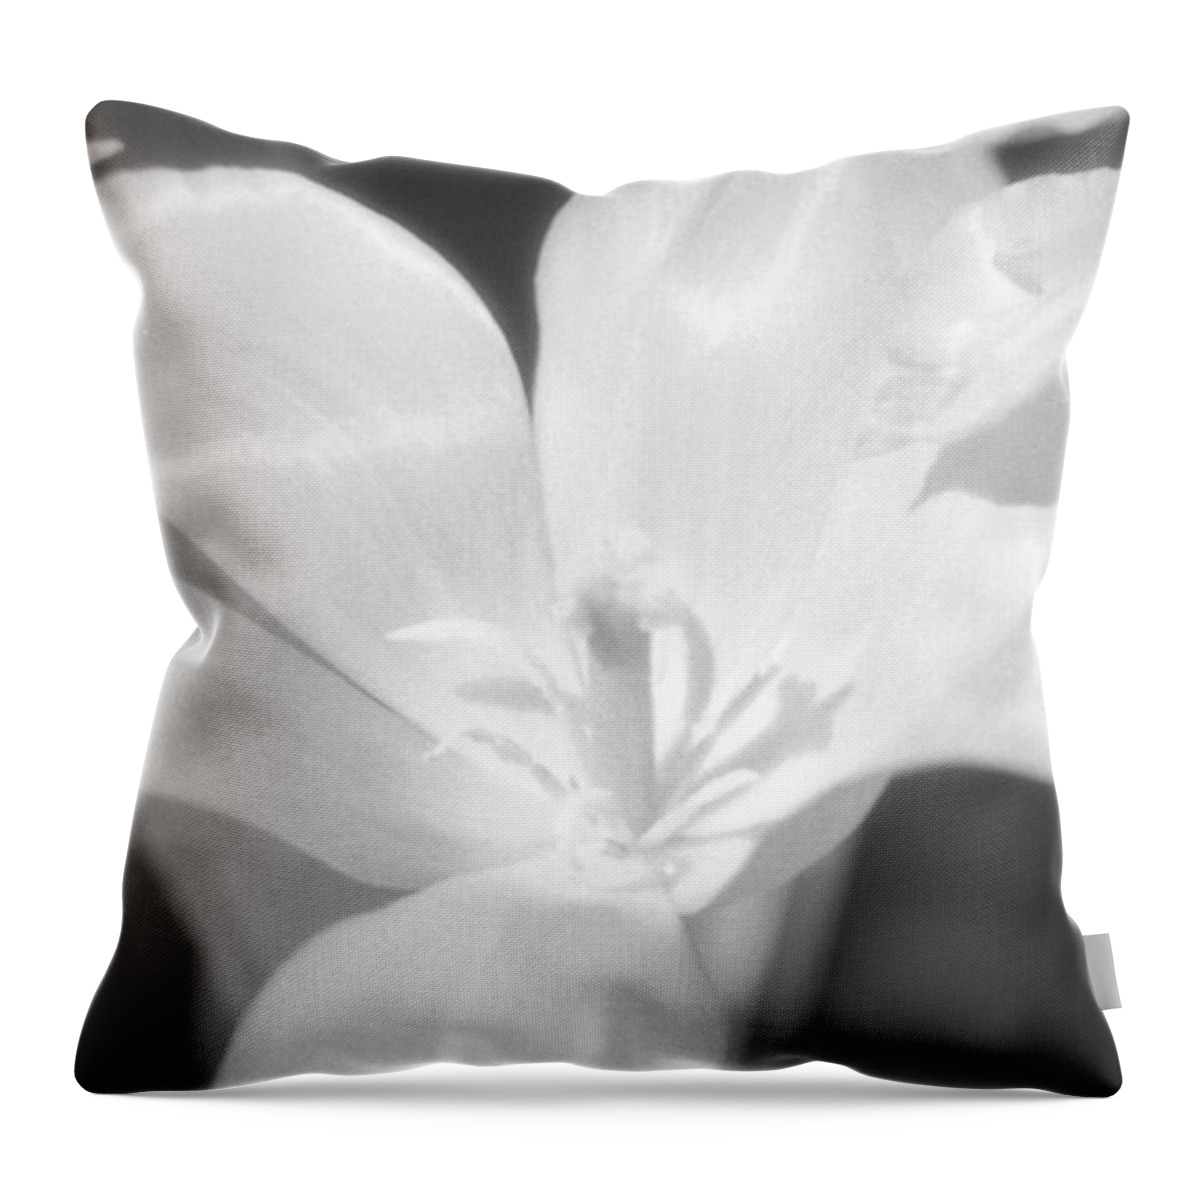 Tulip Throw Pillow featuring the photograph Tulips - Infrared 22 by Pamela Critchlow